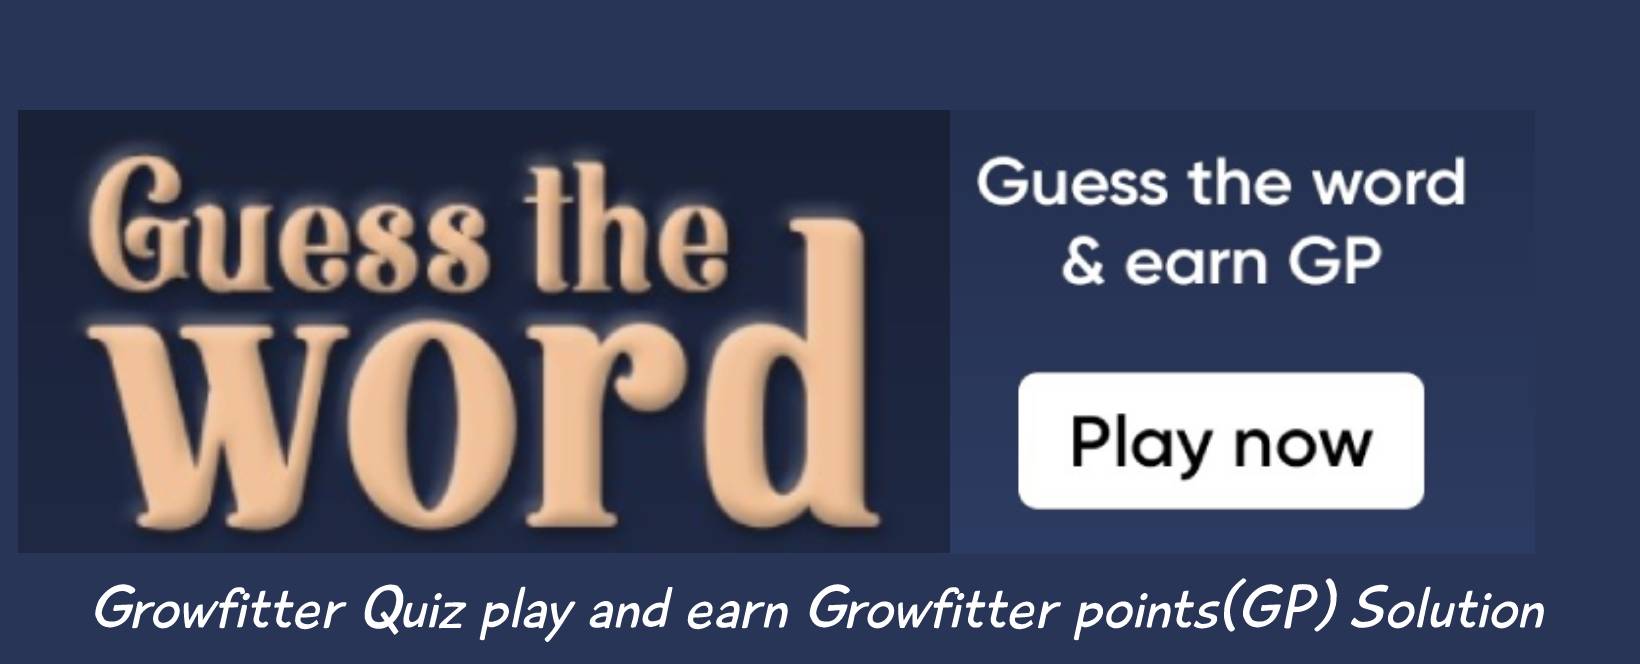 Growfitter Guess the word & earn GP